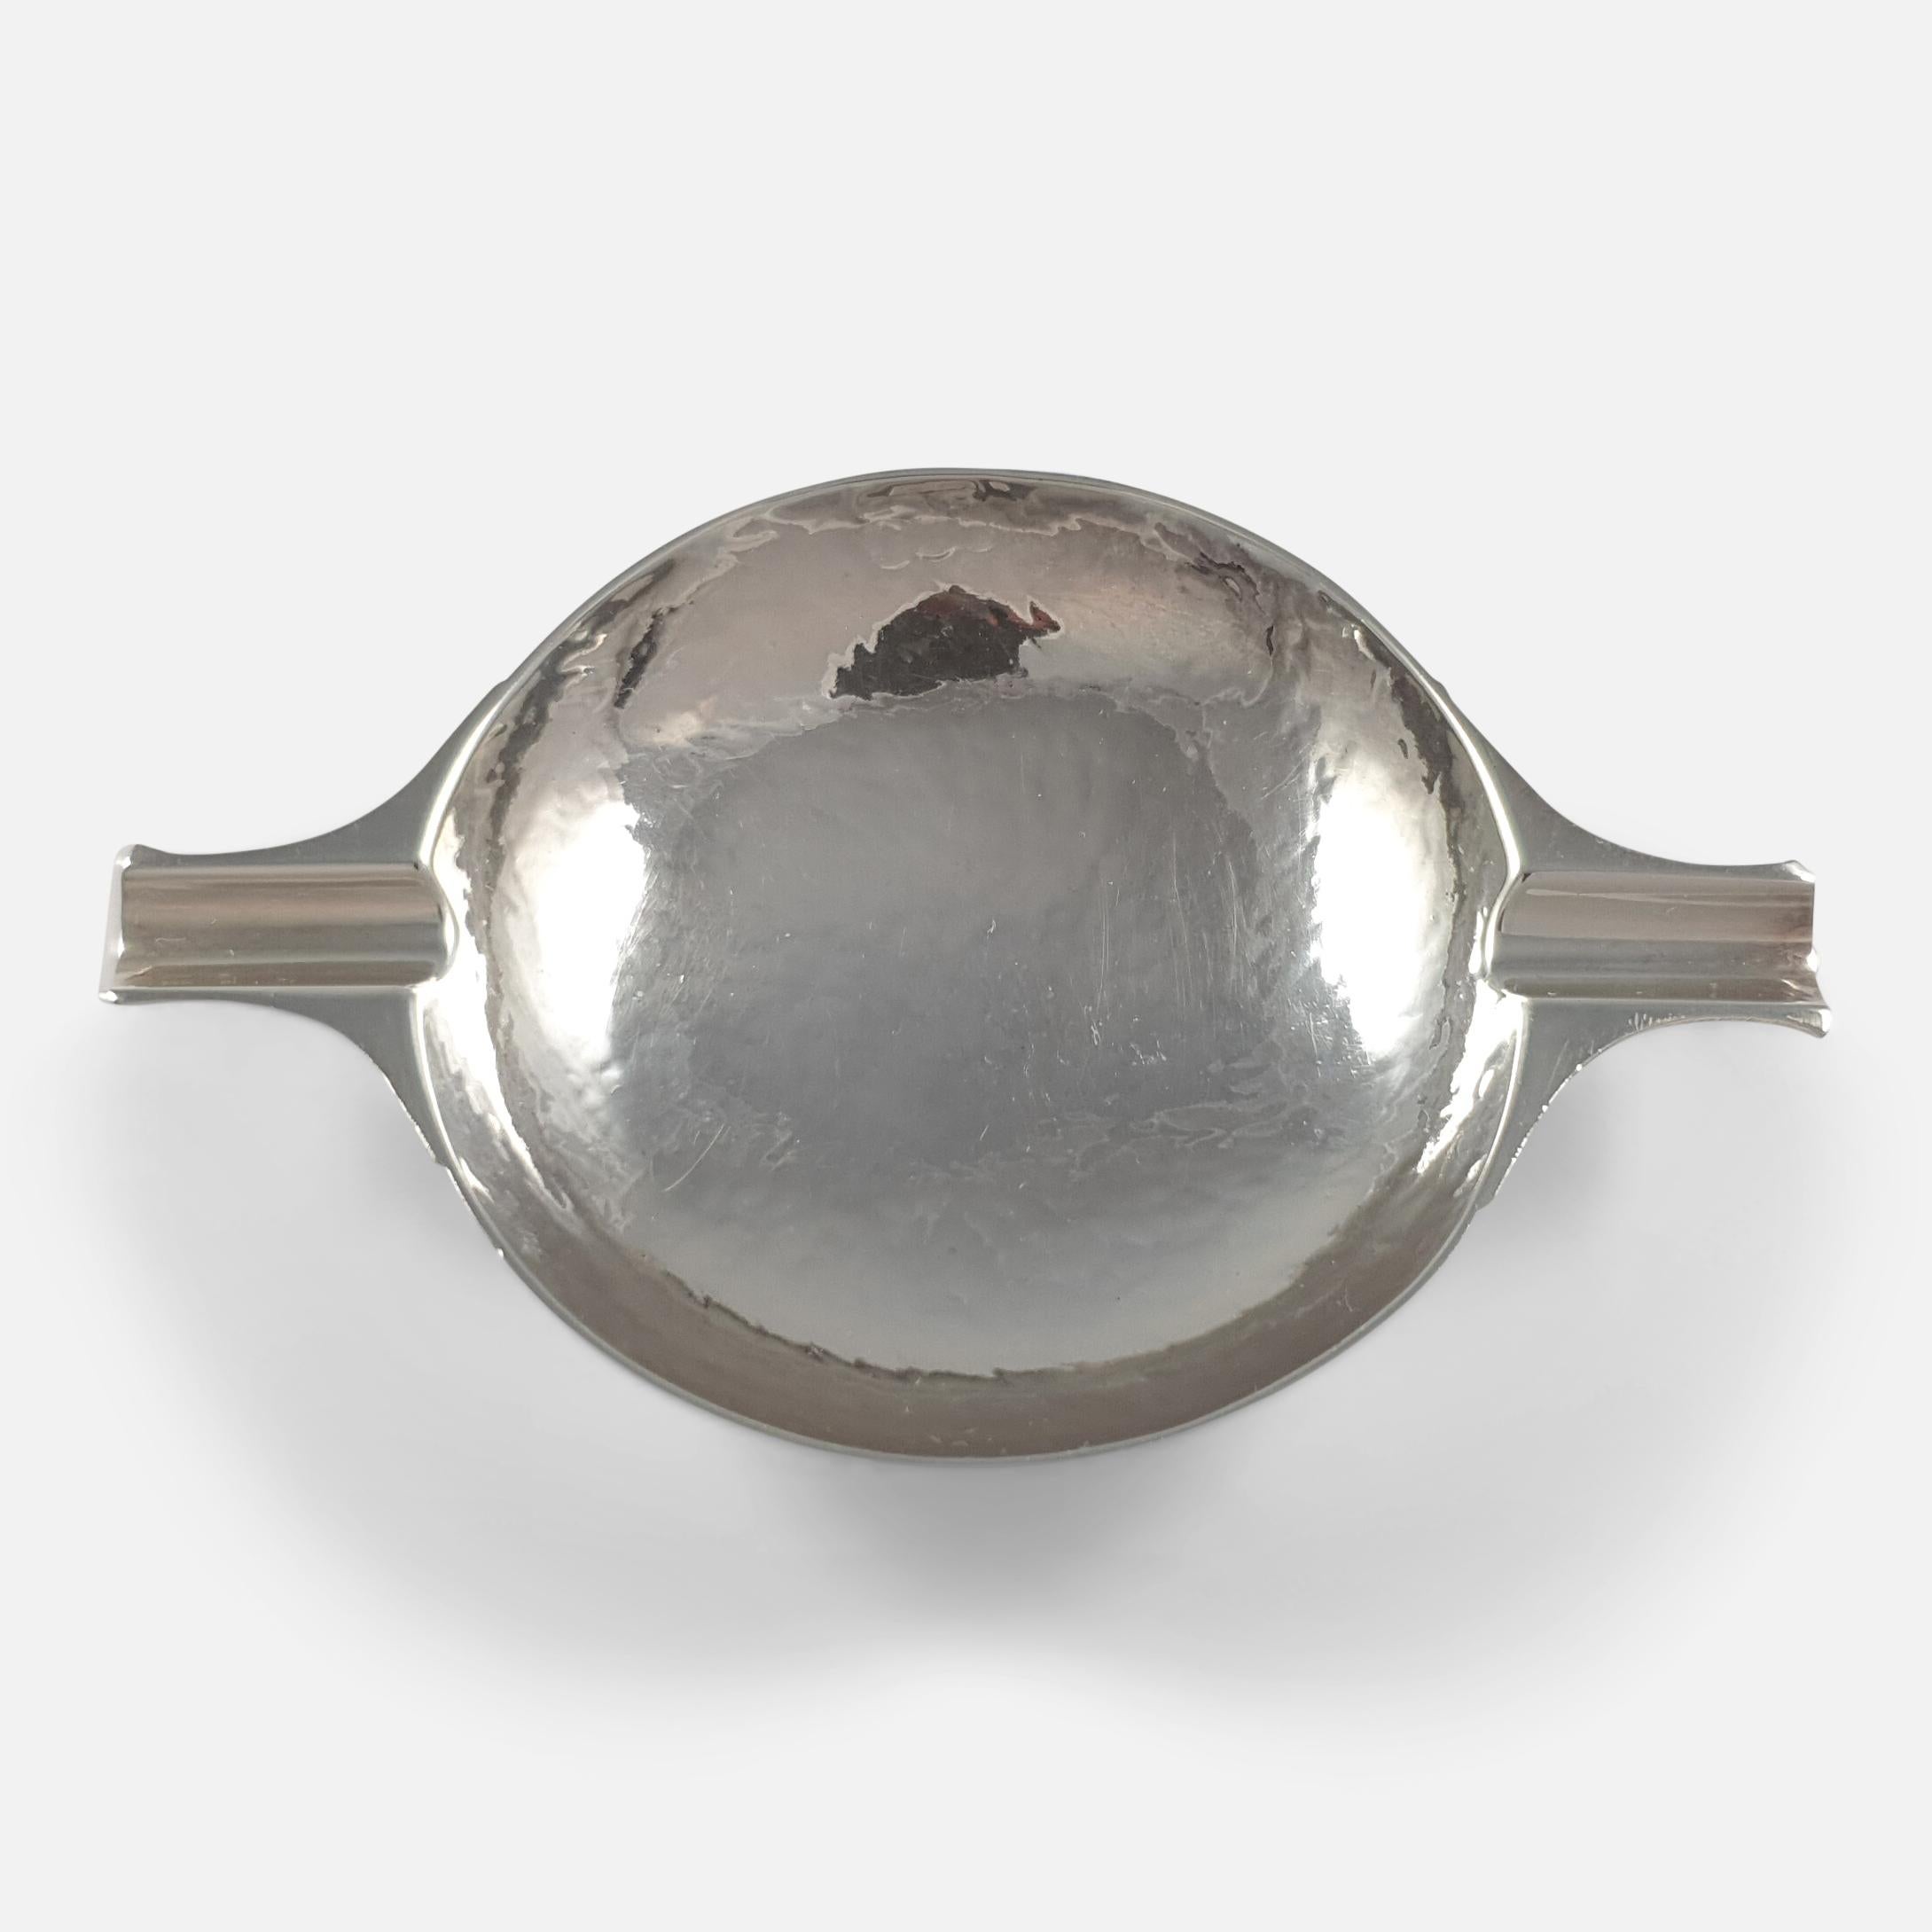 A George V sterling silver ash tray in the form of a small Quaich with a hammered finish. The ash tray is by William Robb of Ballater, with Edinburgh marks for 1924.

Assay: .925 (Sterling Silver).

Date: 1924.

Engraving: N/A.

Maker: William